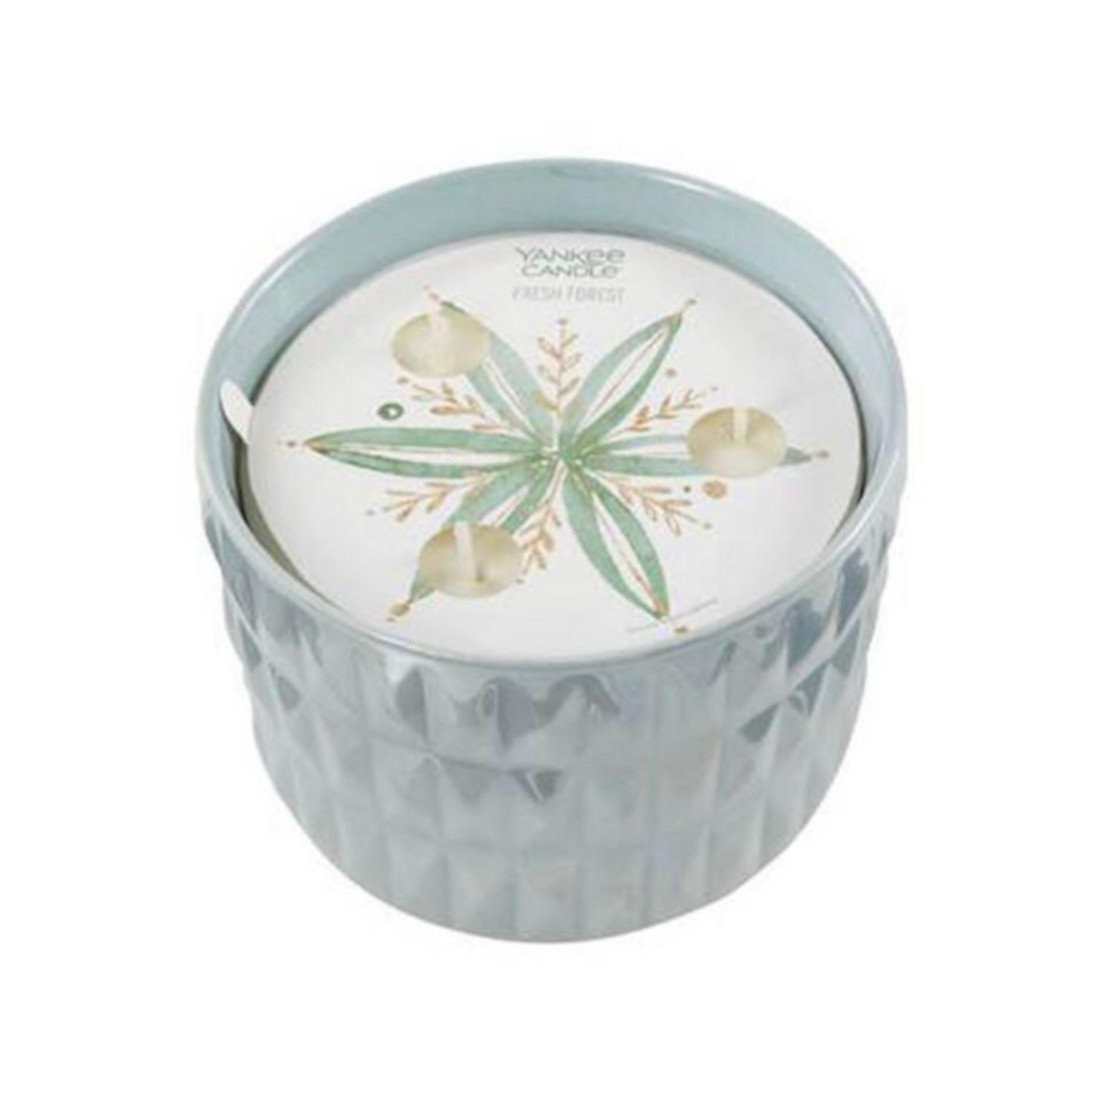 Yankee Candle Fresh Forest Winter Wish Ceramic Candle